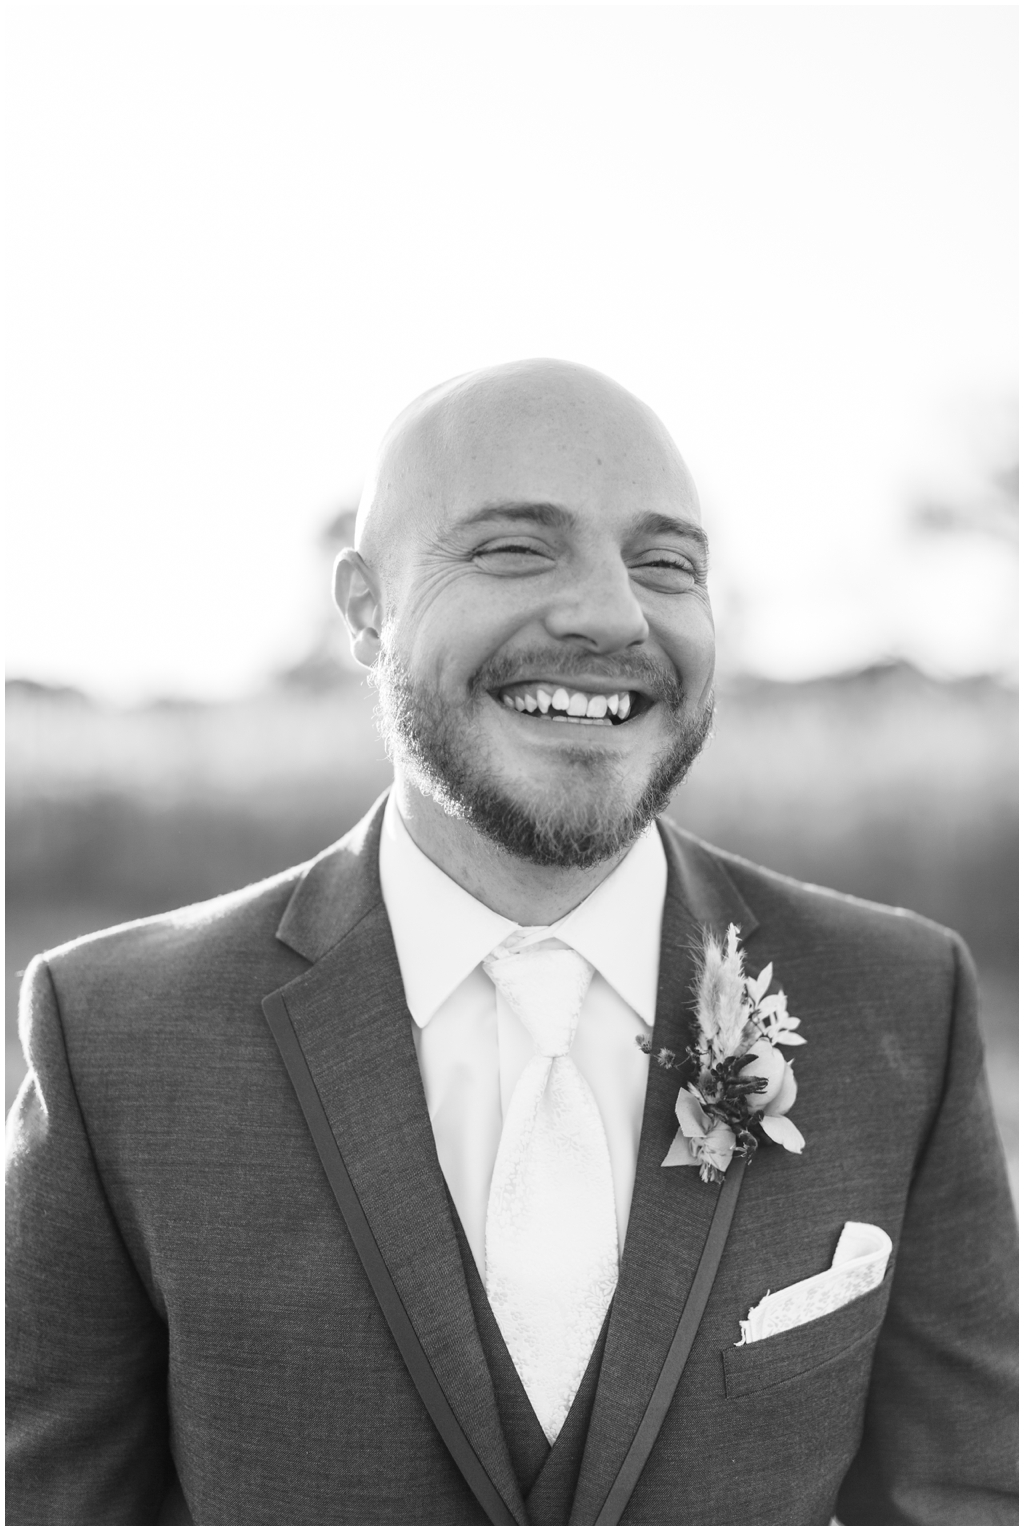 Black and white portrait of groom